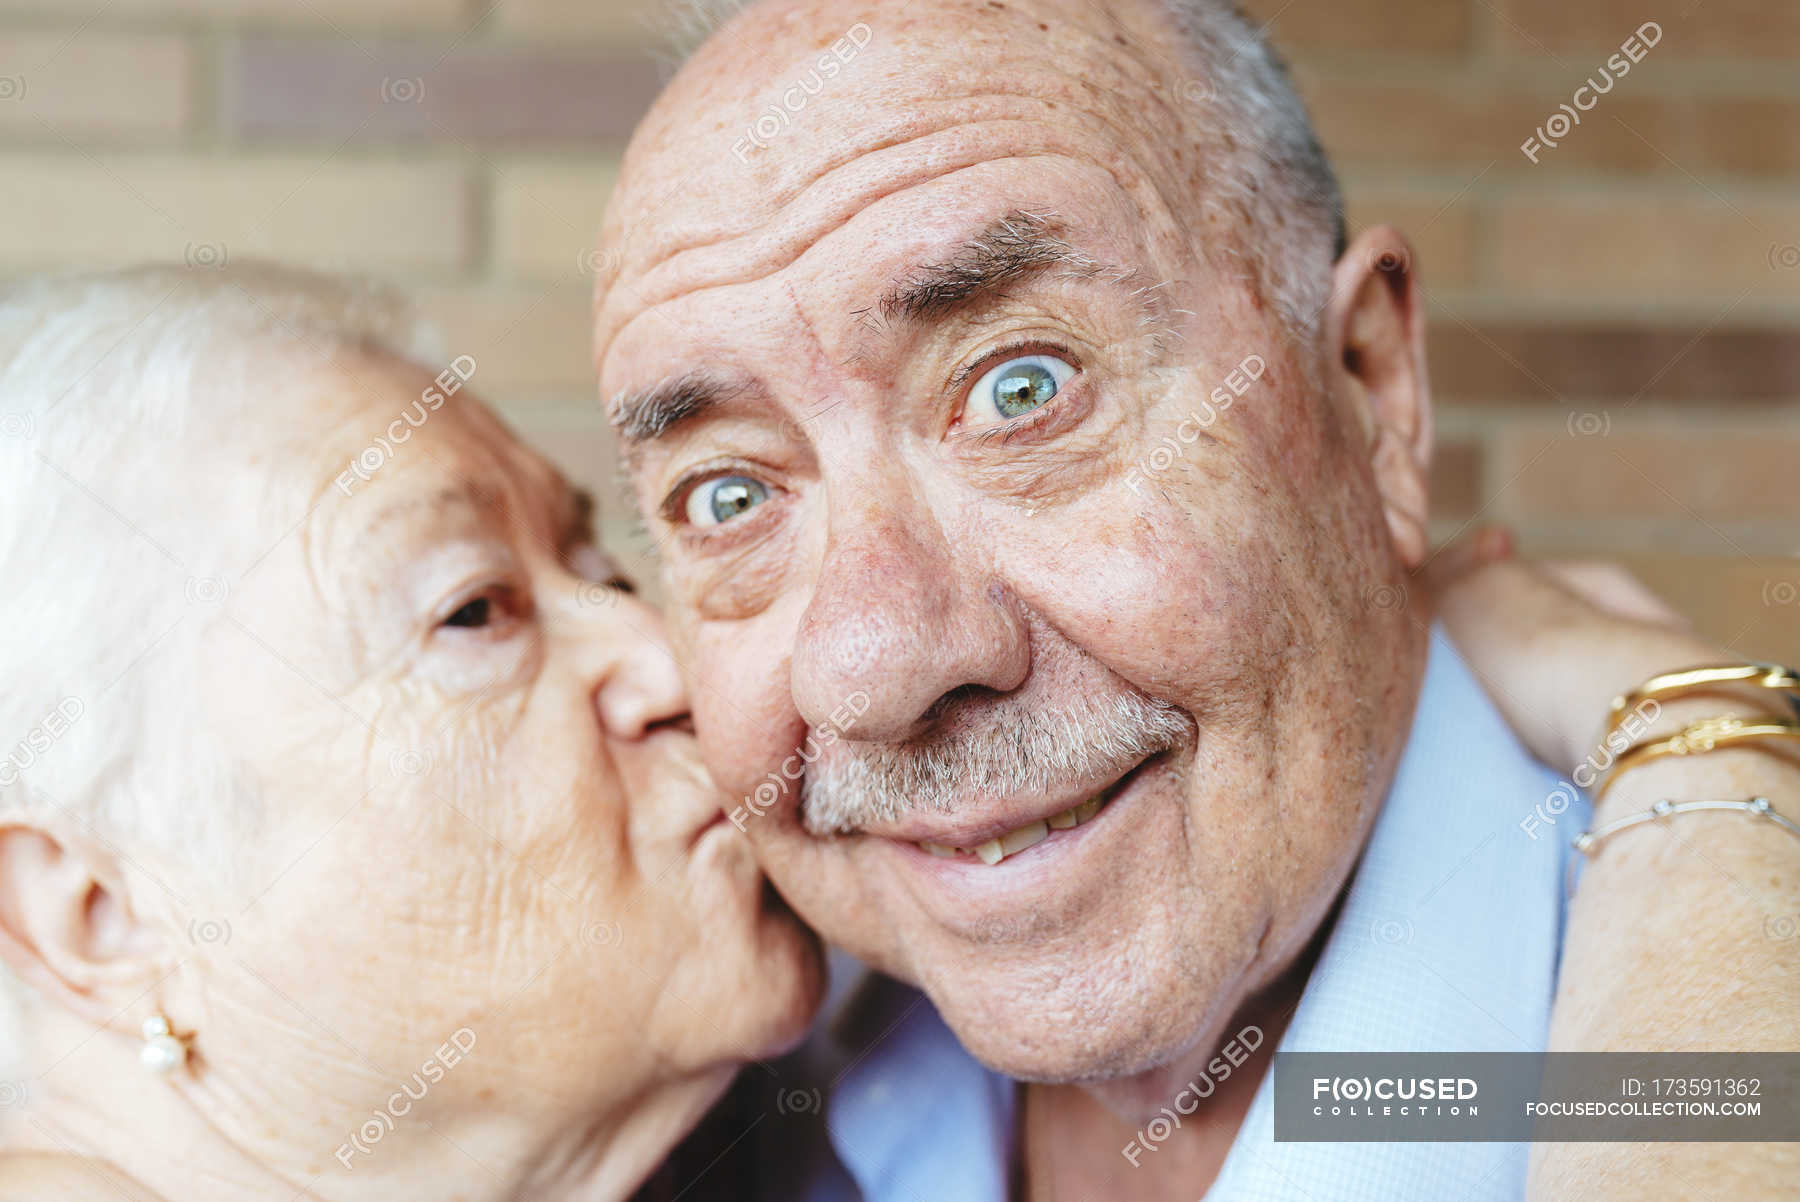 Senior man pulling funny face while his wife kissing him — smiling,  embracing - Stock Photo | #173591362